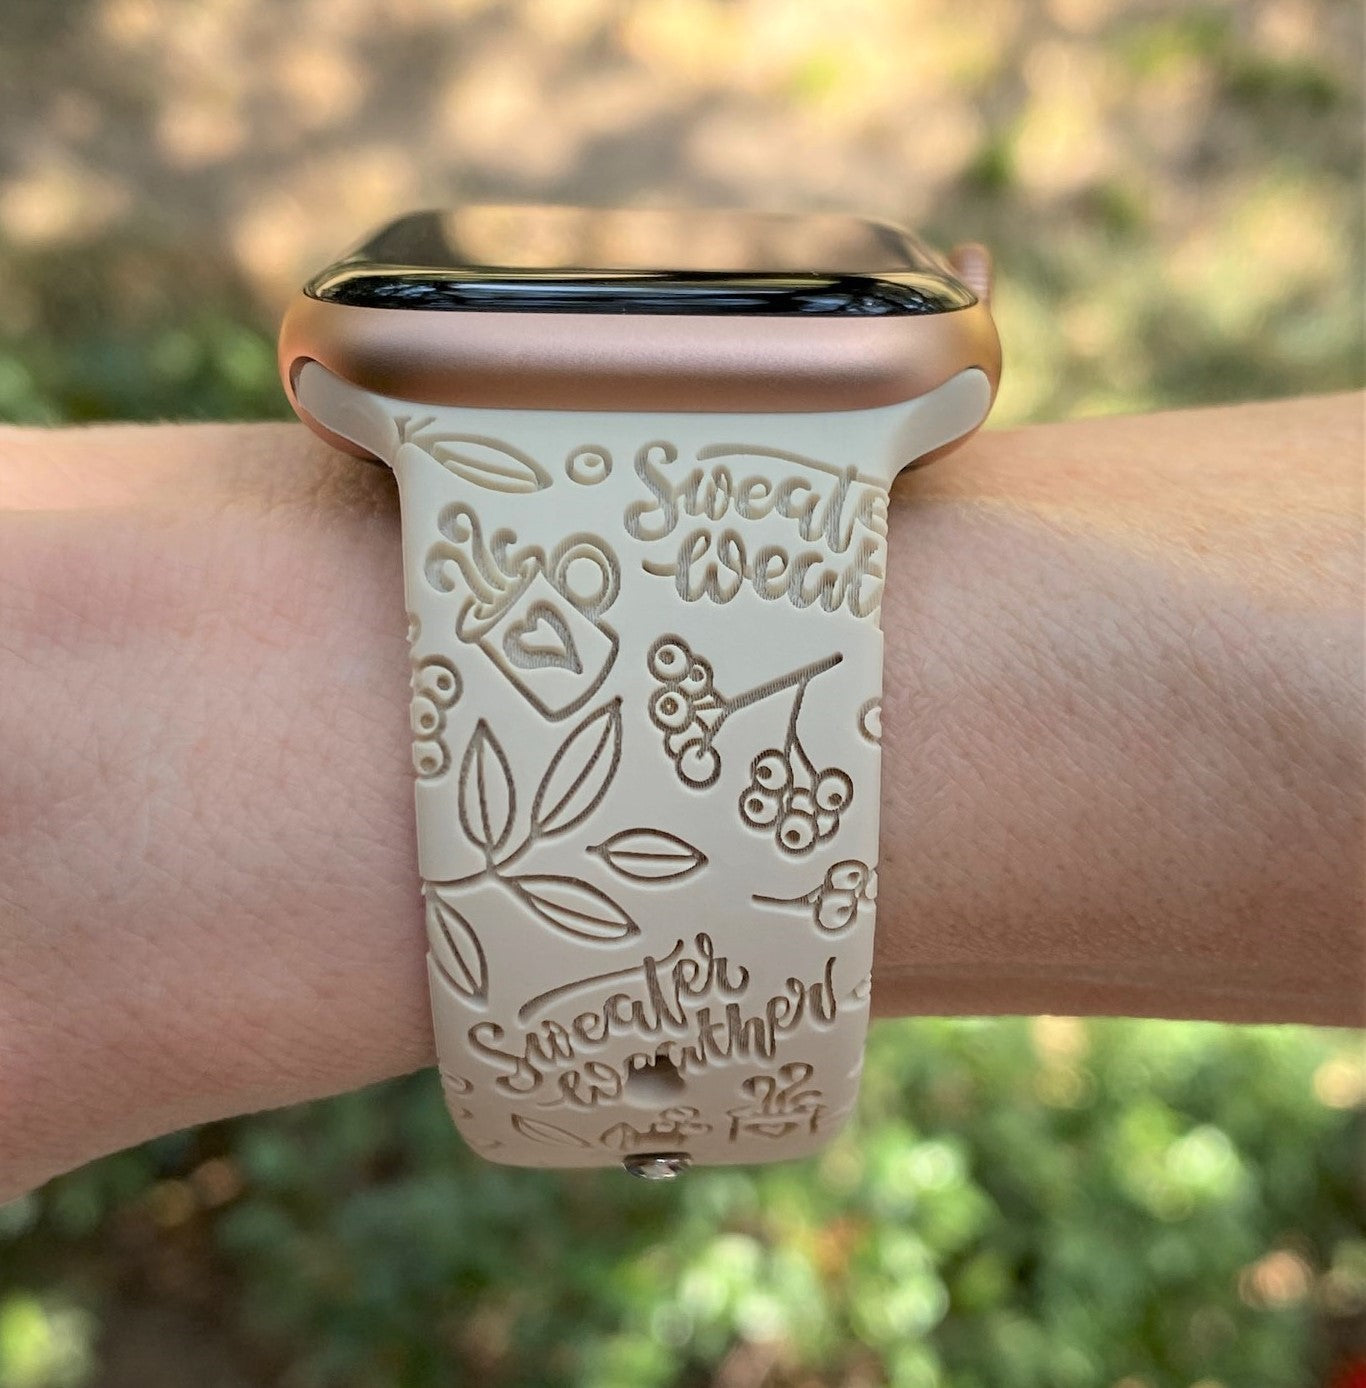 Sweater Weather Apple Watch Band